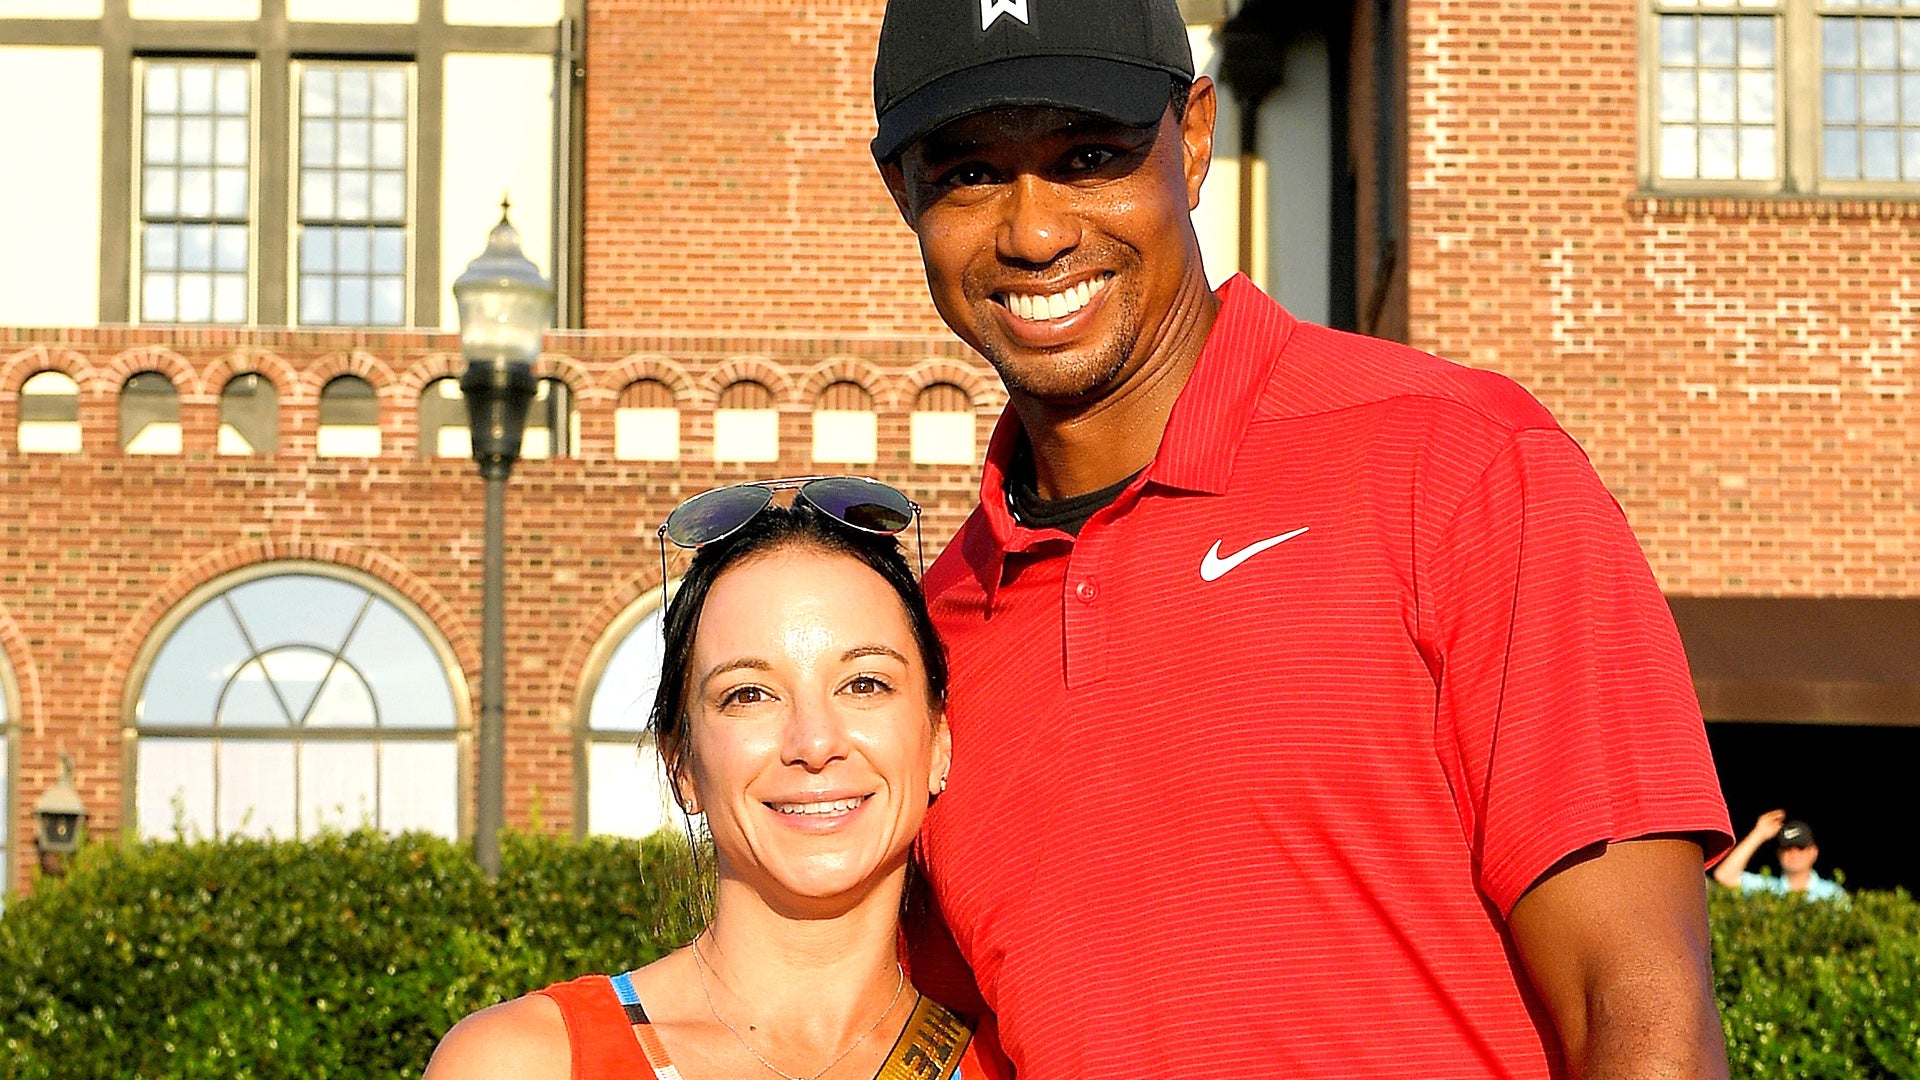 Tiger Woods Ex-Girlfriend Erica Herman Files to Nullify NDA Citing Sexual Assault Act Entertainment Tonight image